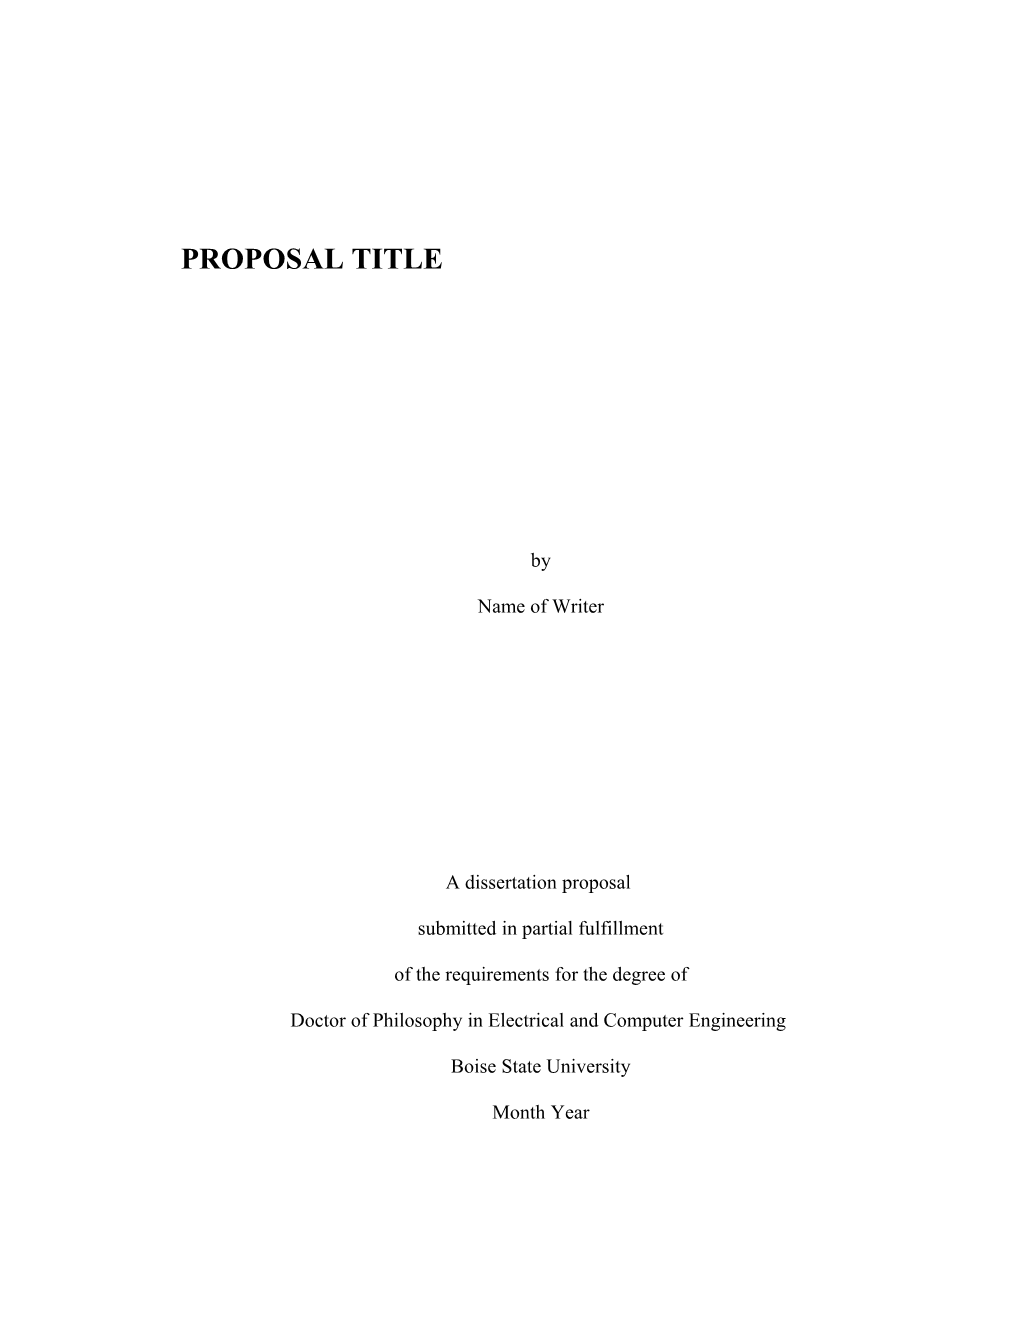 Thesis Proposal Template